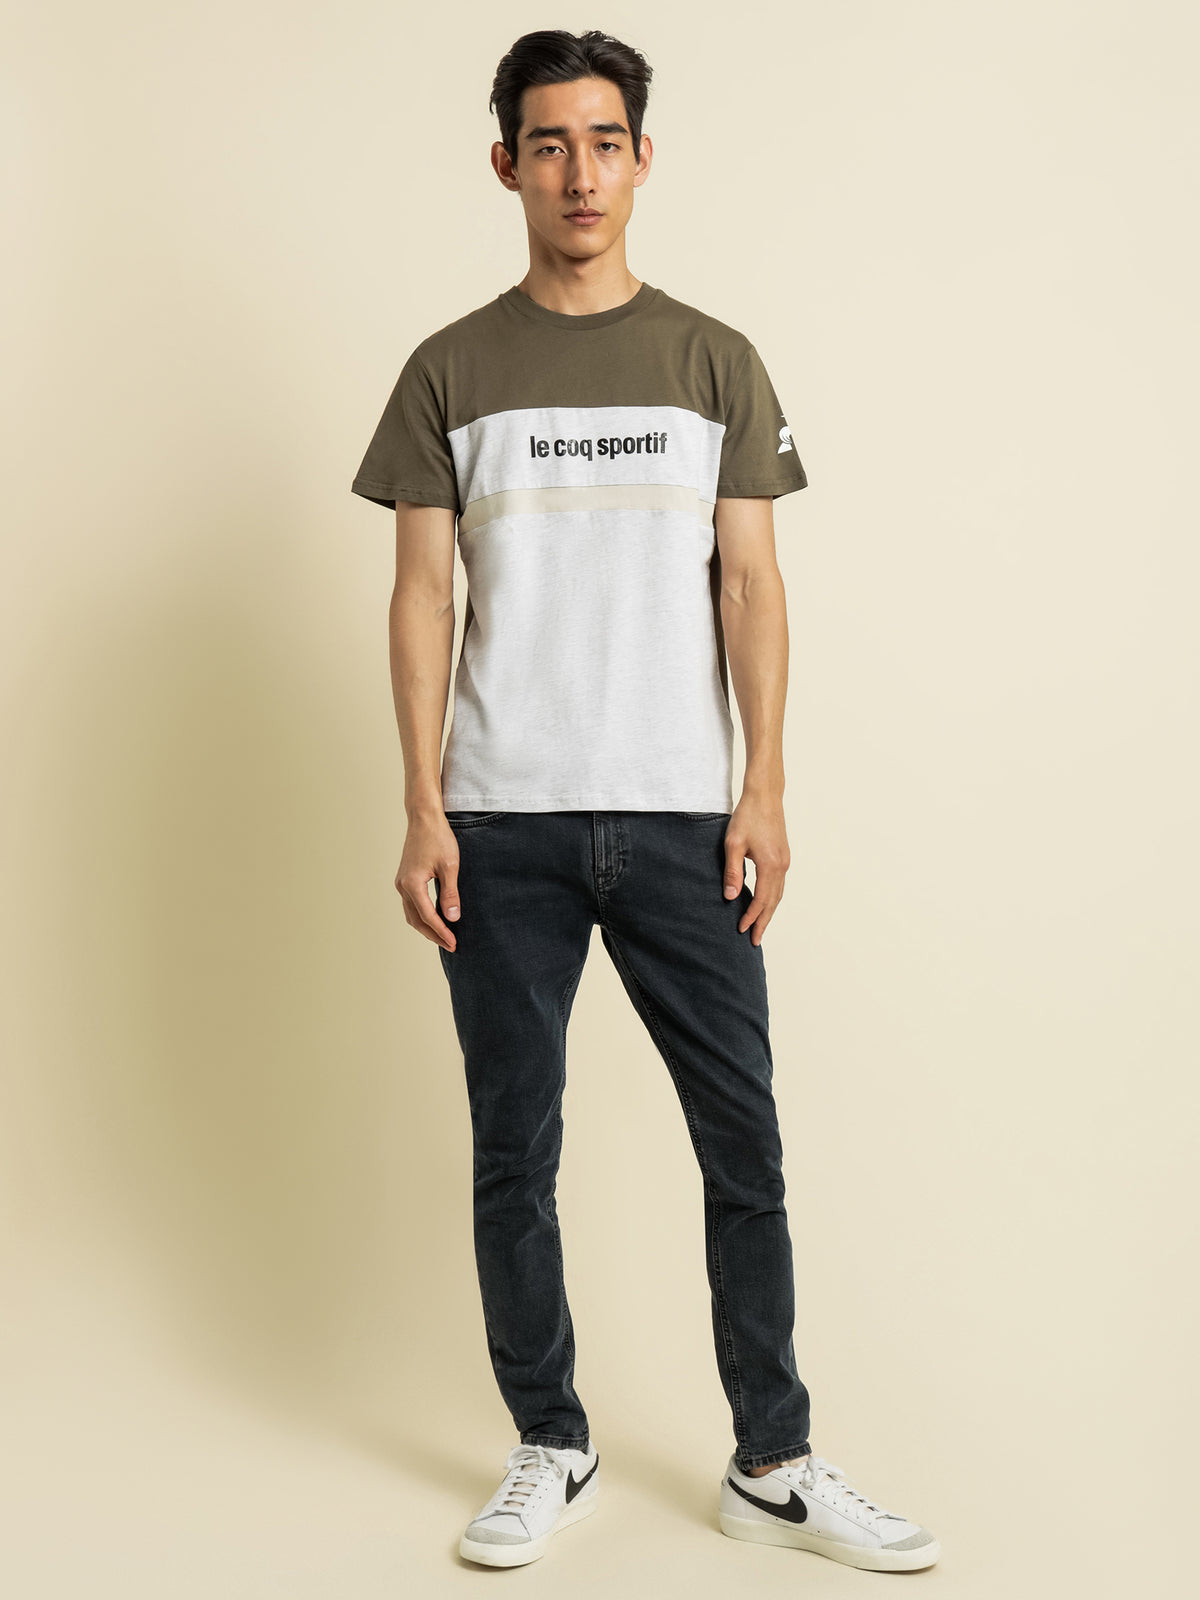 Georges T-Shirt in Khaki